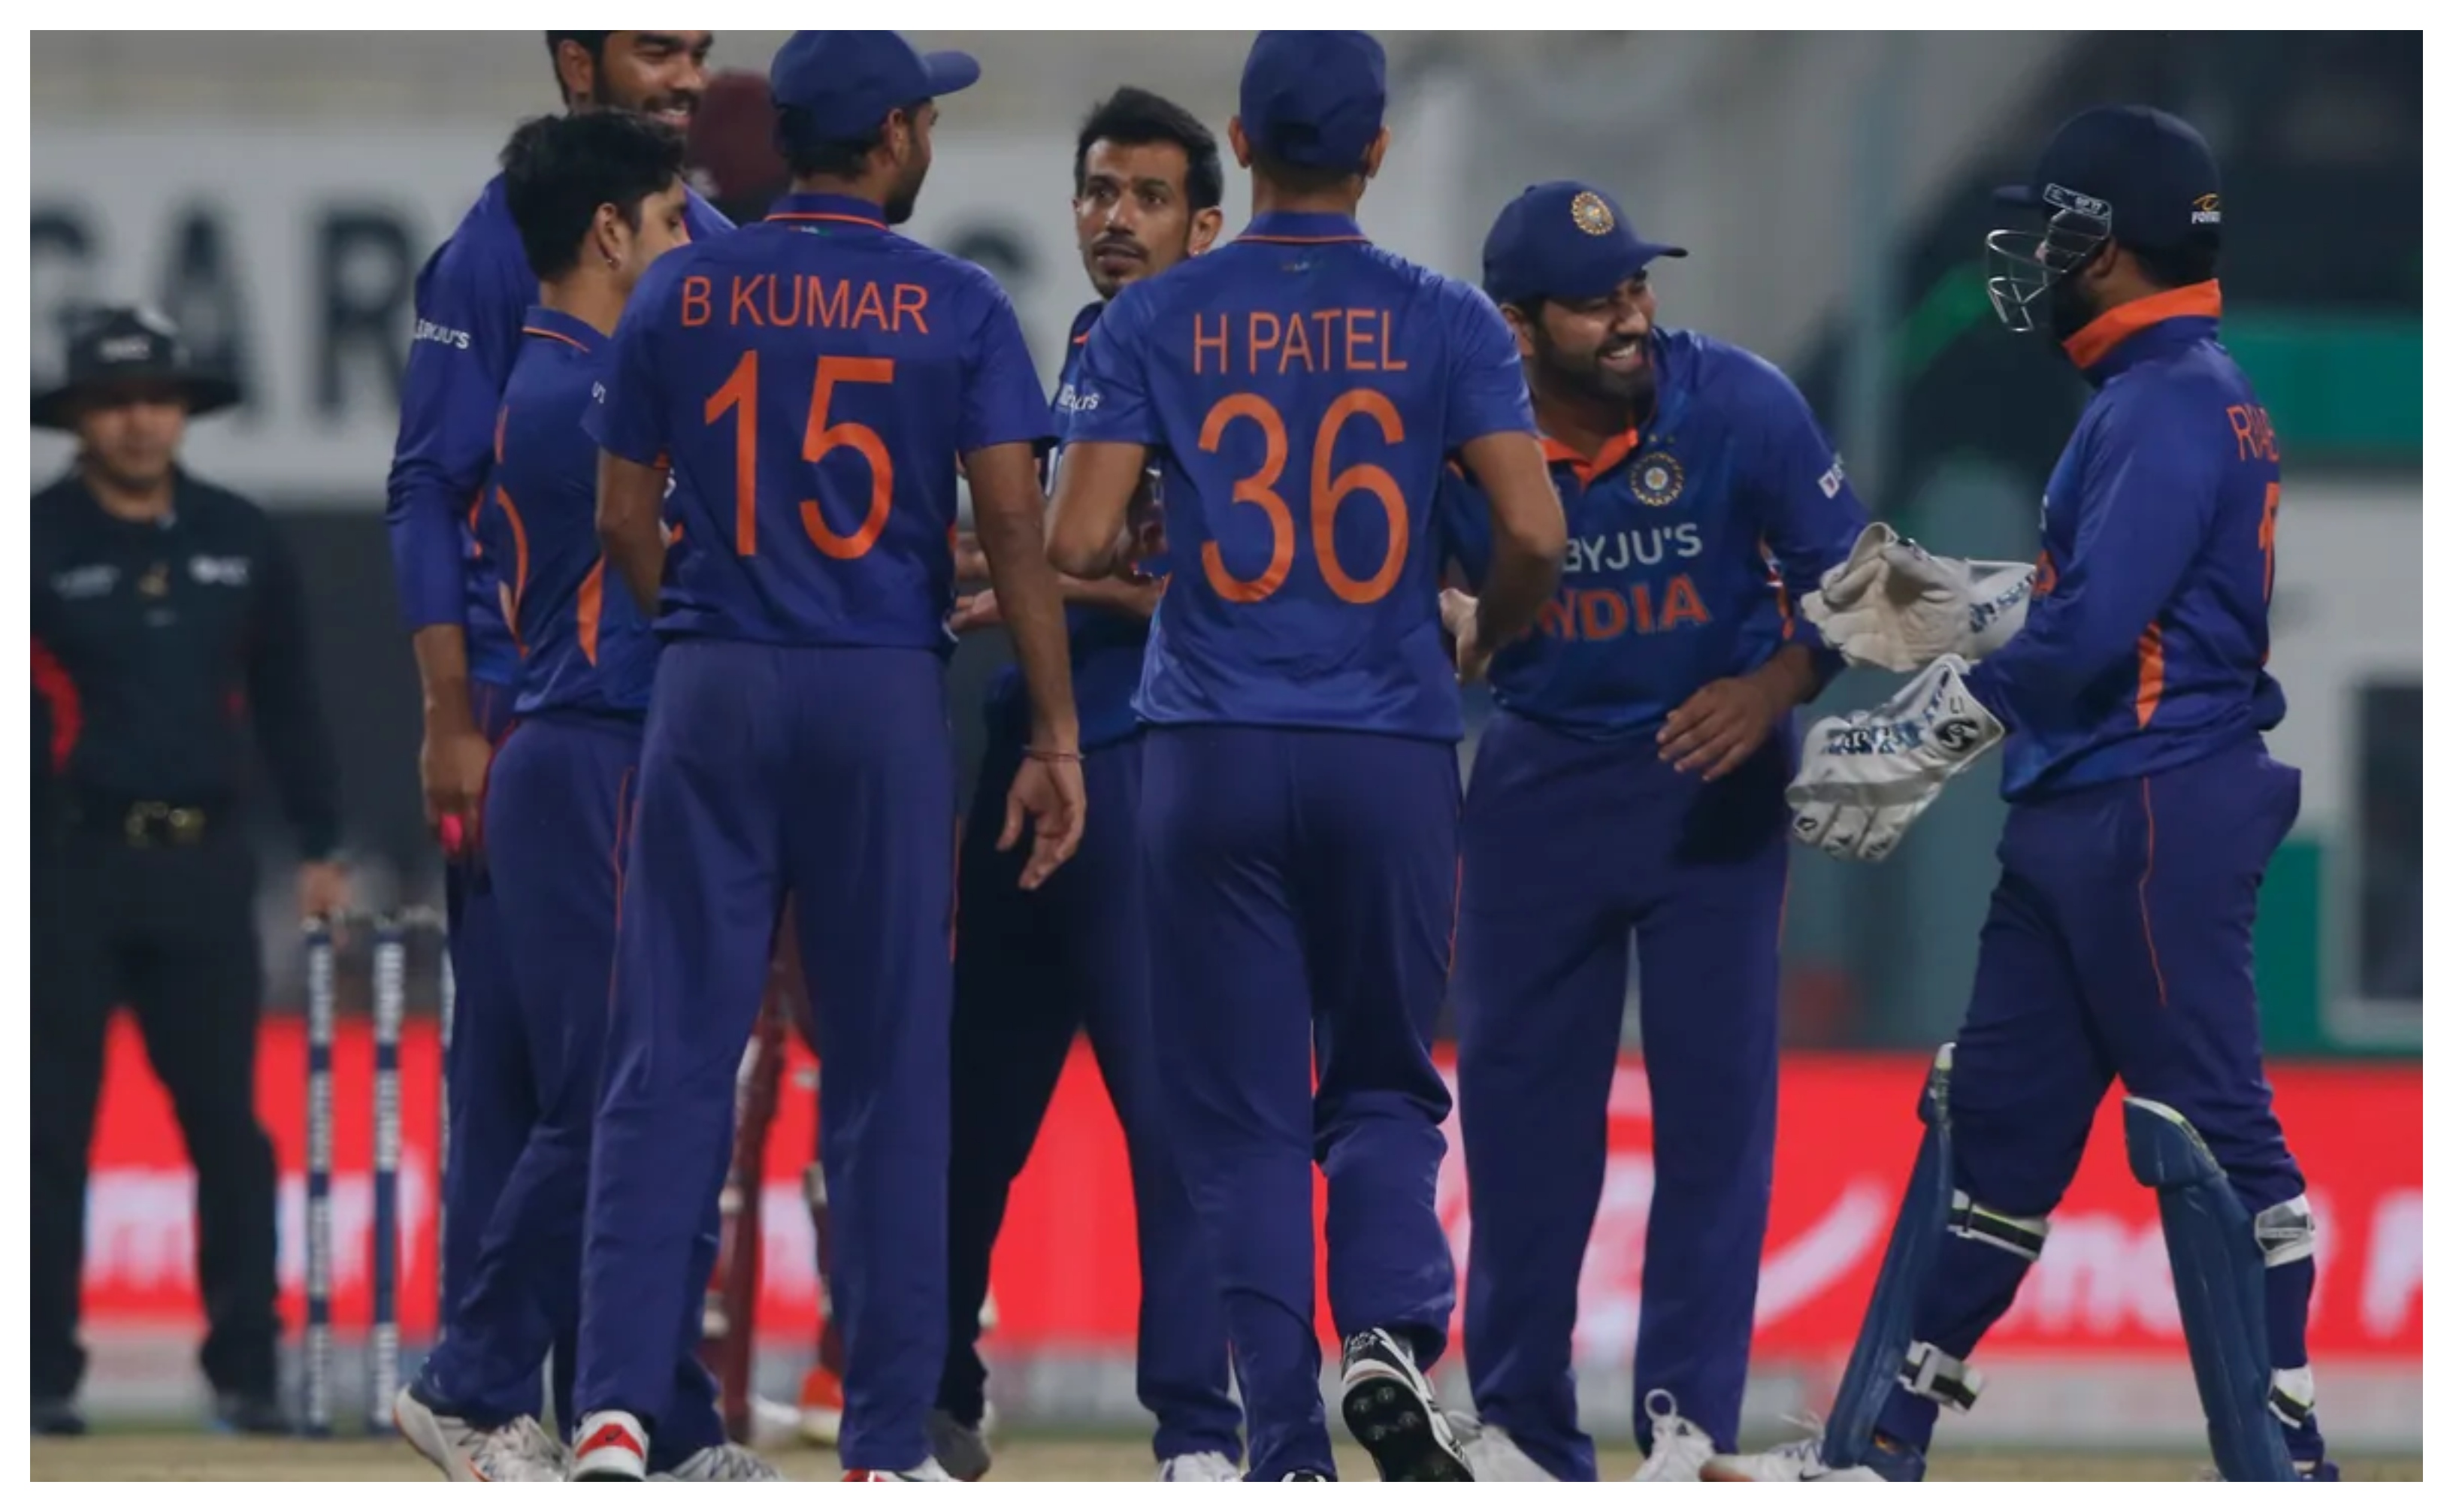 Team India are leading the T20I series 2-0 | BCCI